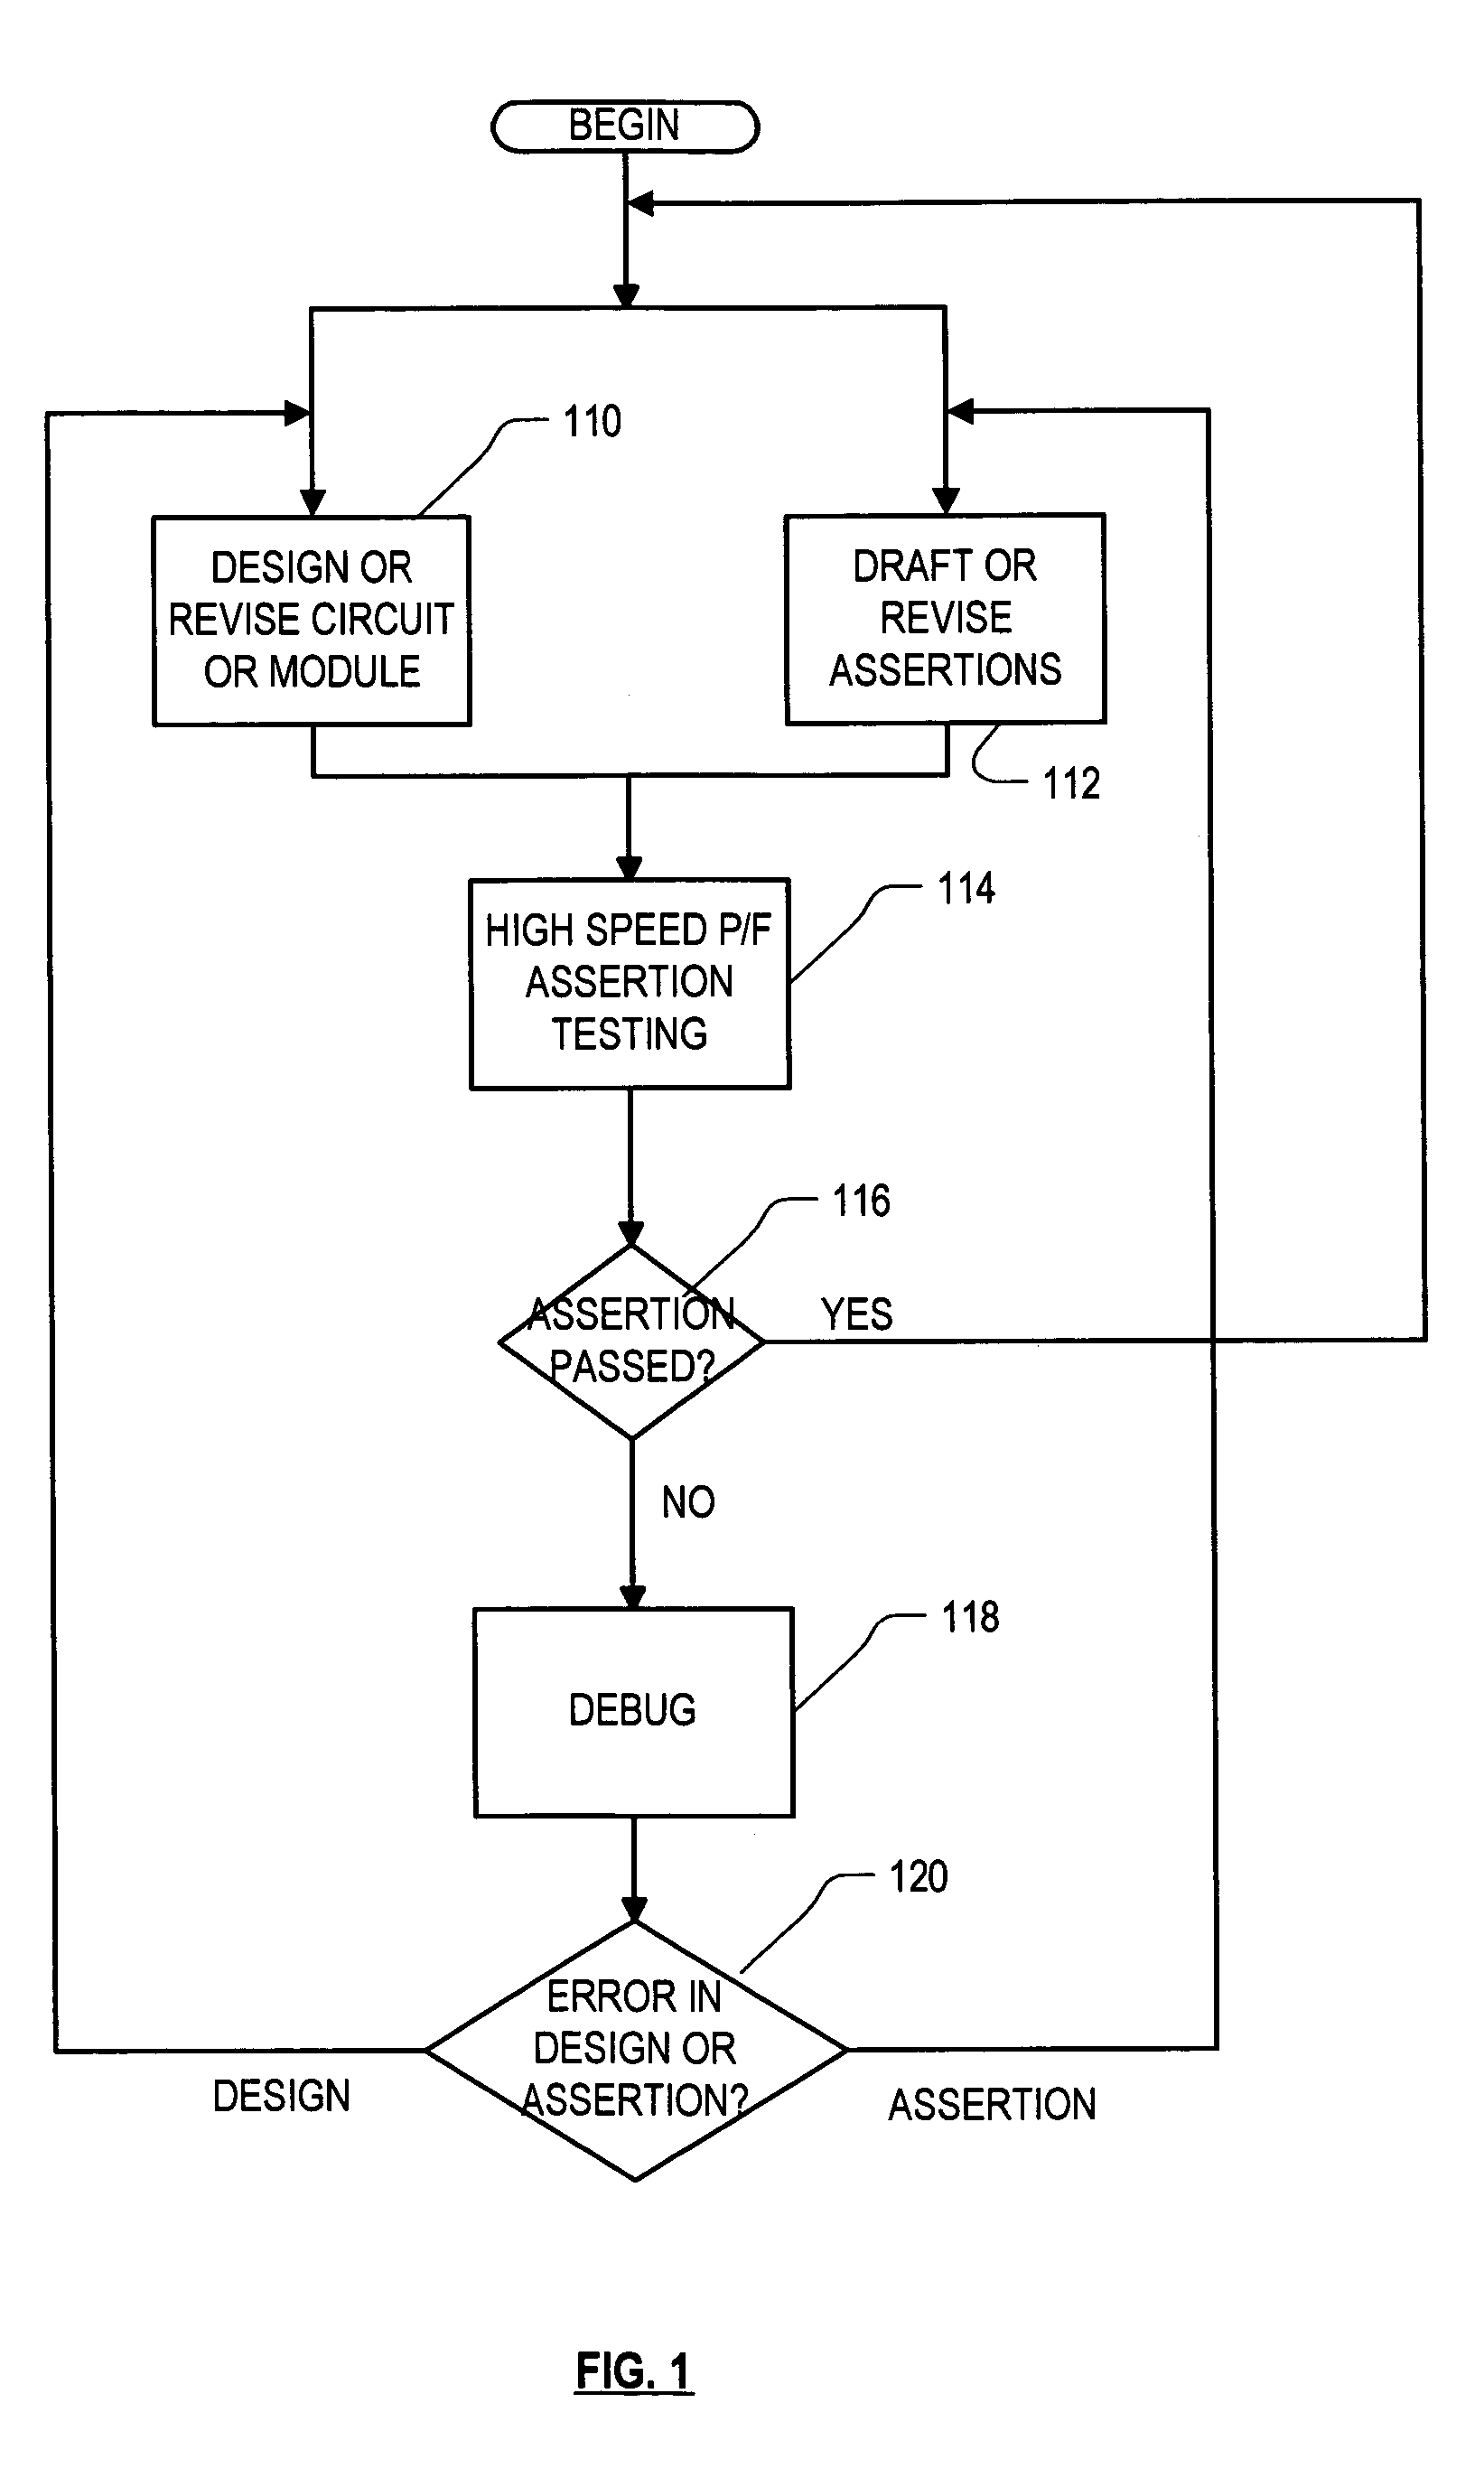 Method and apparatus for evaluating and debugging assertions